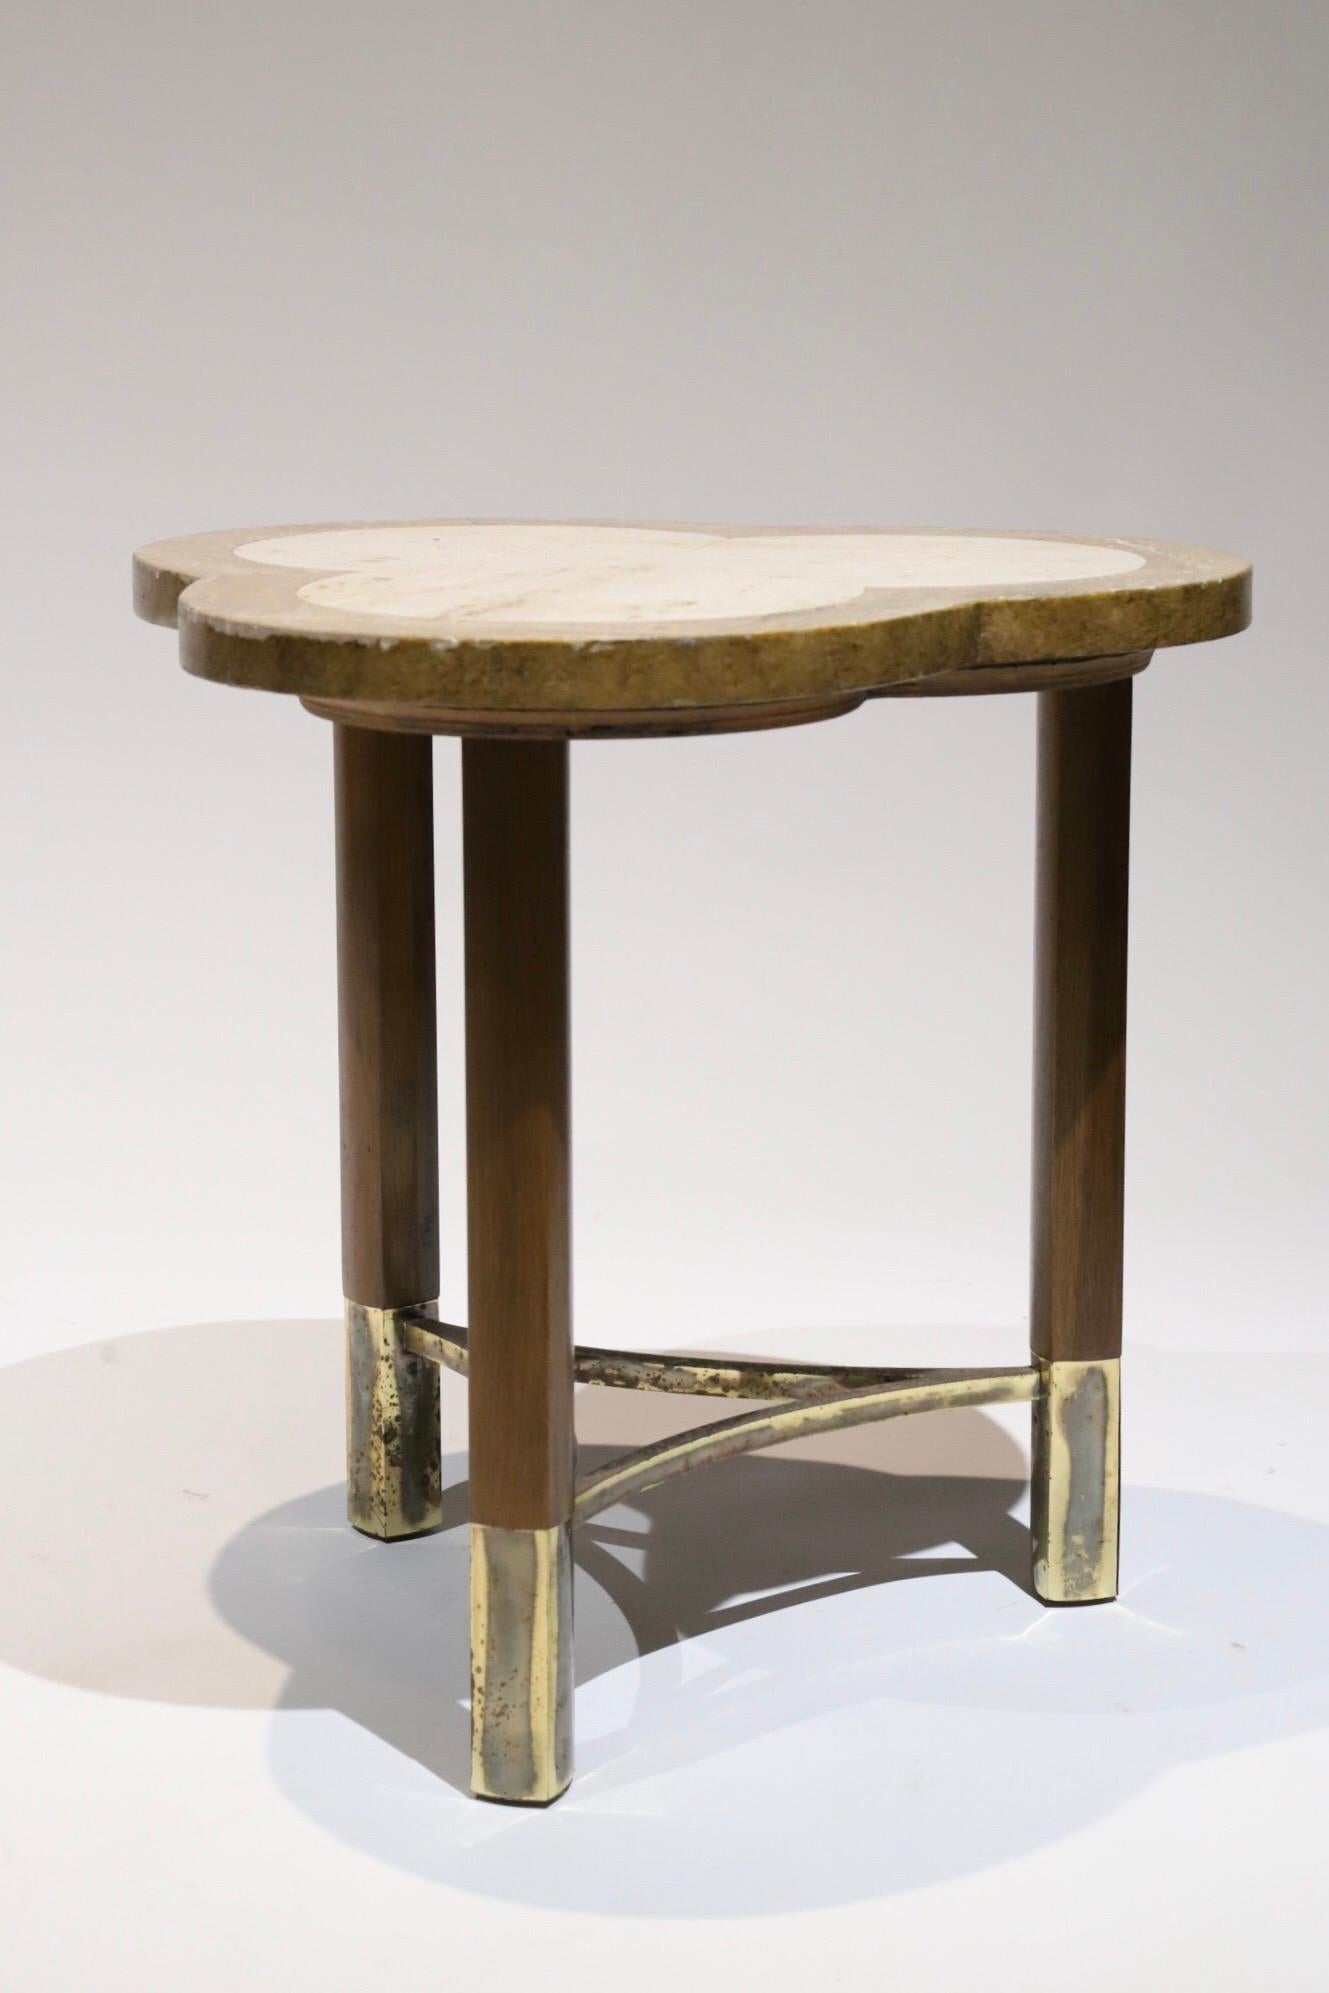 Clover leaf shaped side table with two tone travertine top, wood legs and brass caped feet. Pictured with Paul Mccobb armchair and Iphone for scale.